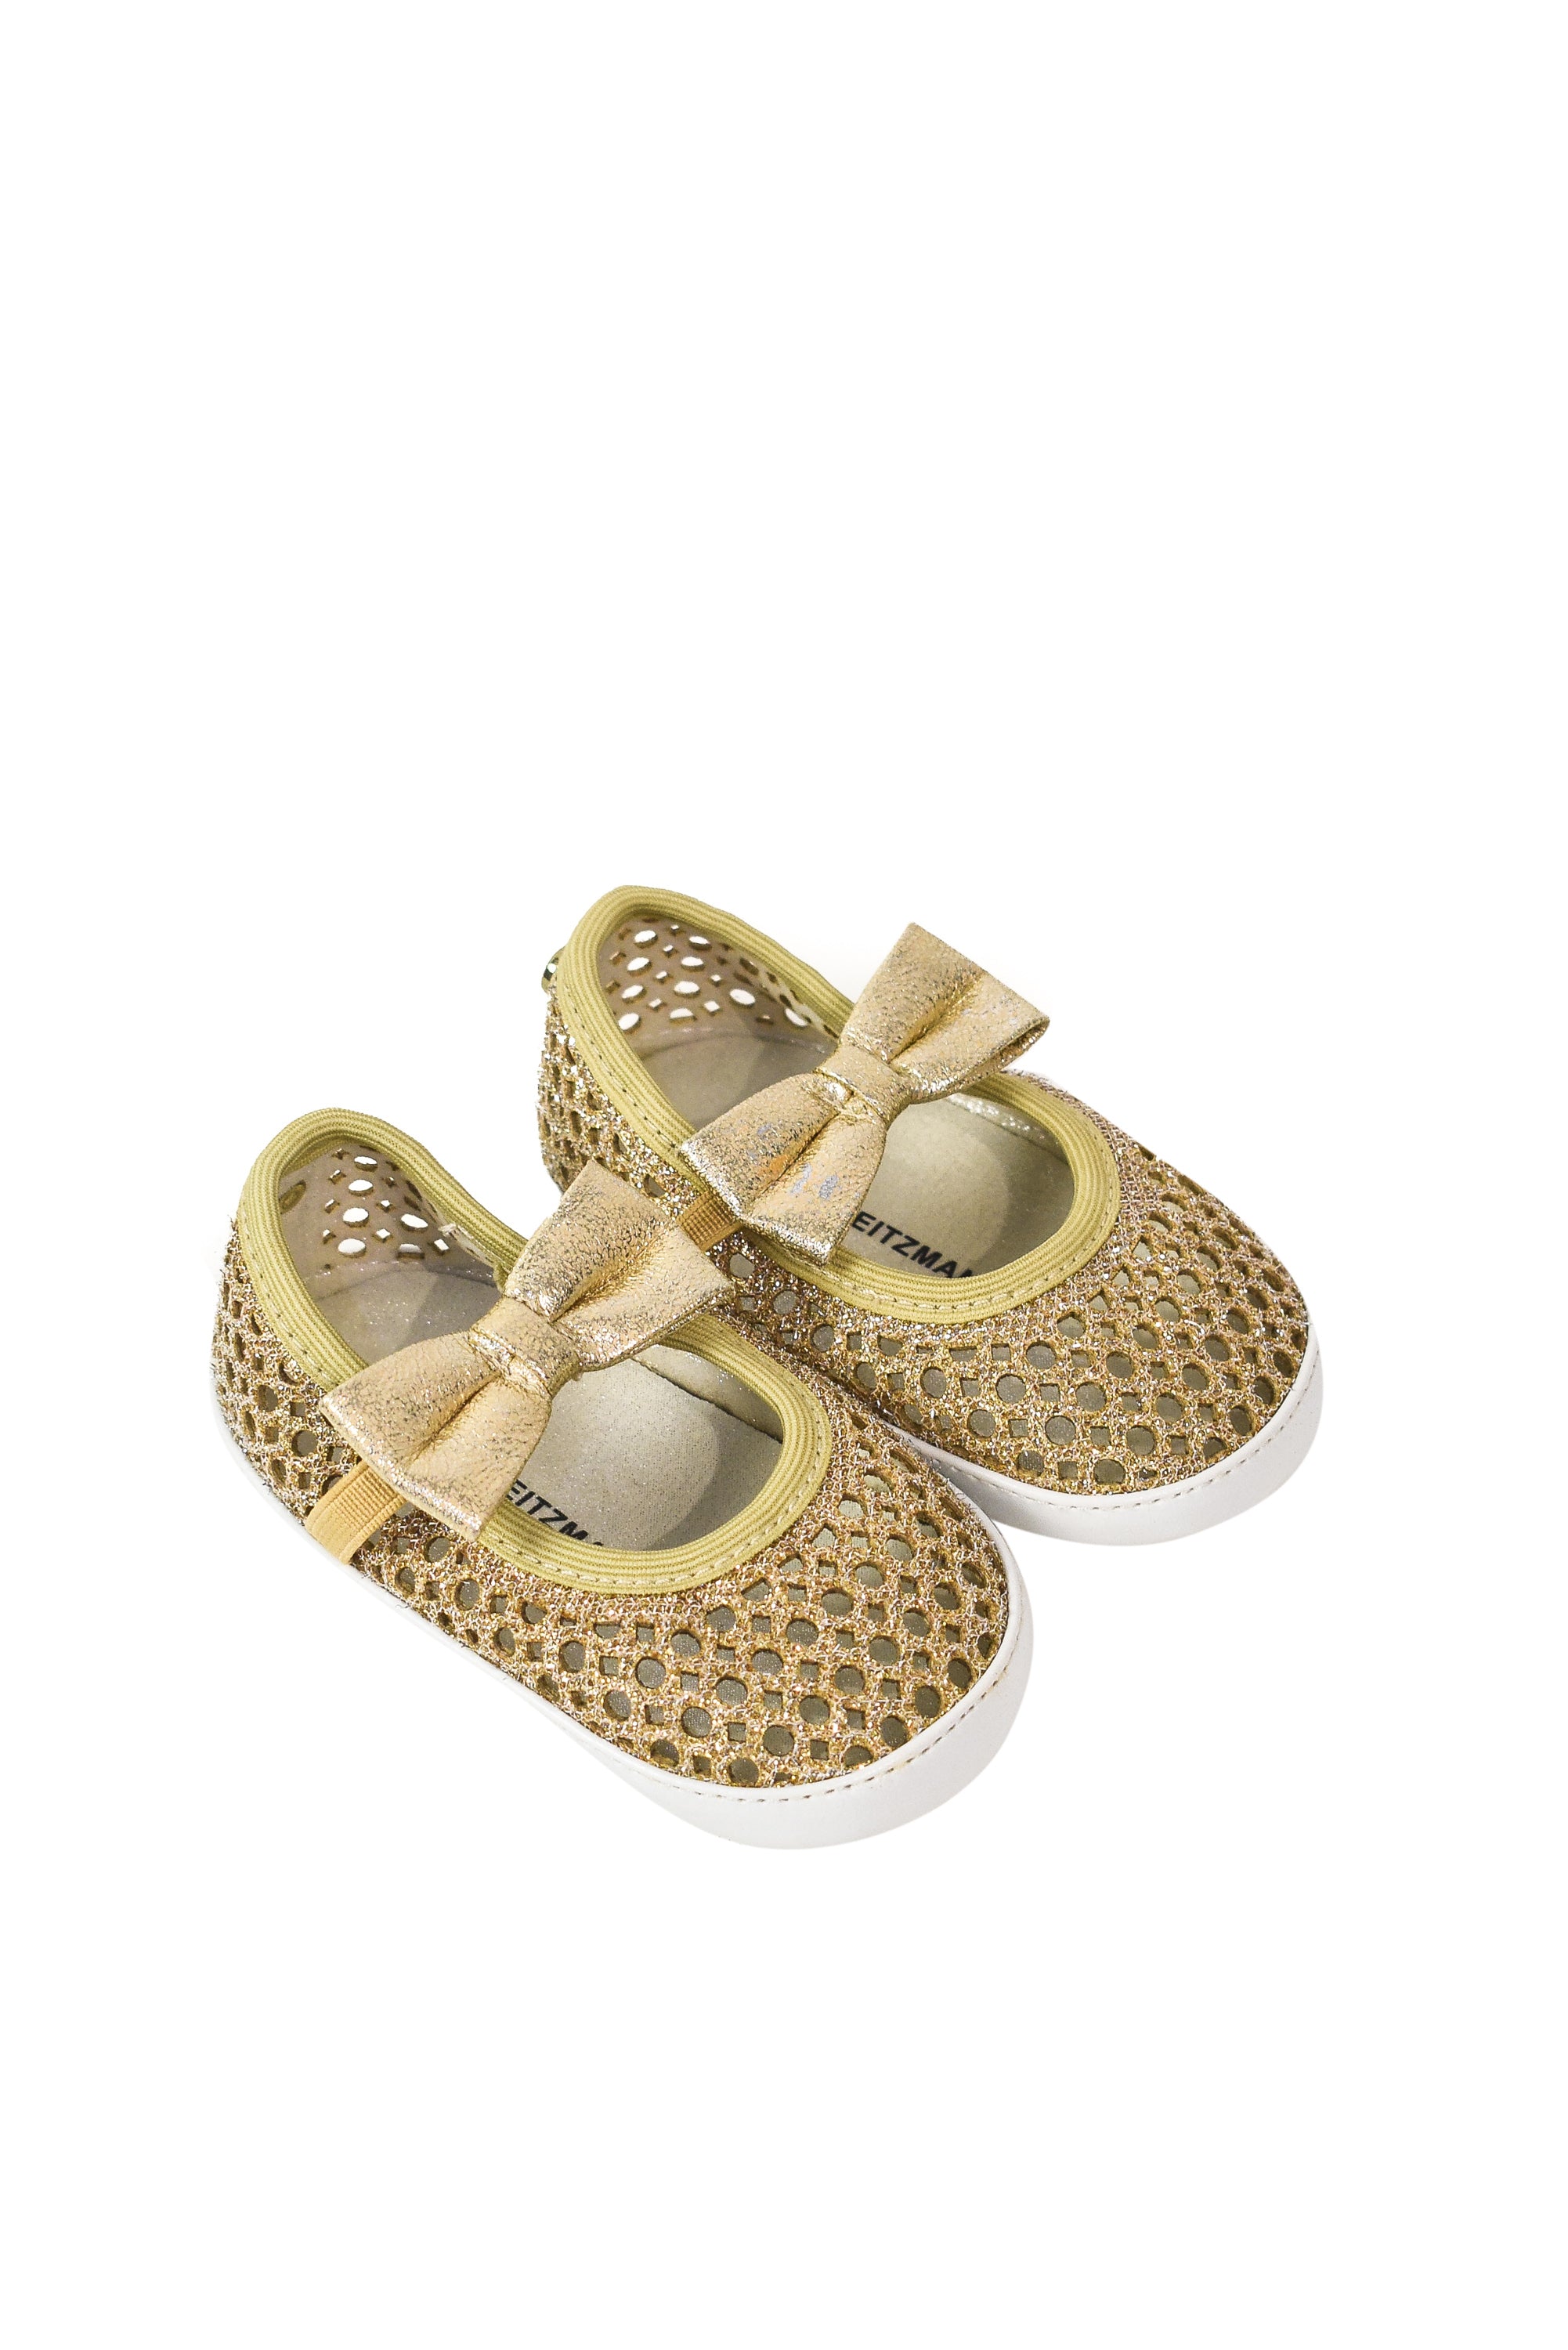 gold baby flats